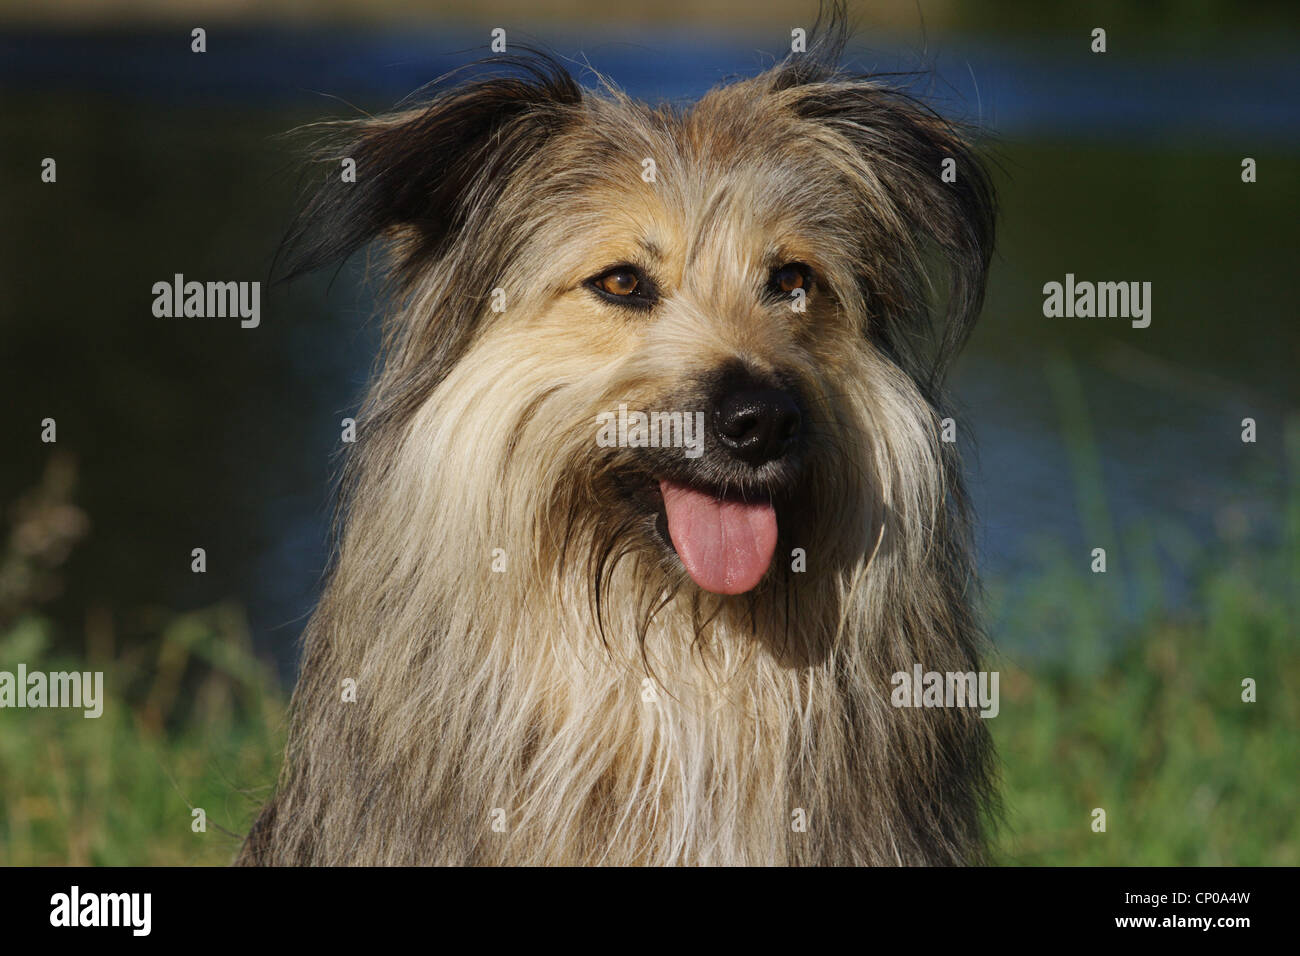 Berger de Picardie, Berger Picard (Canis lupus f. familiaris), portrait of a three years old mixed breed dog Stock Photo